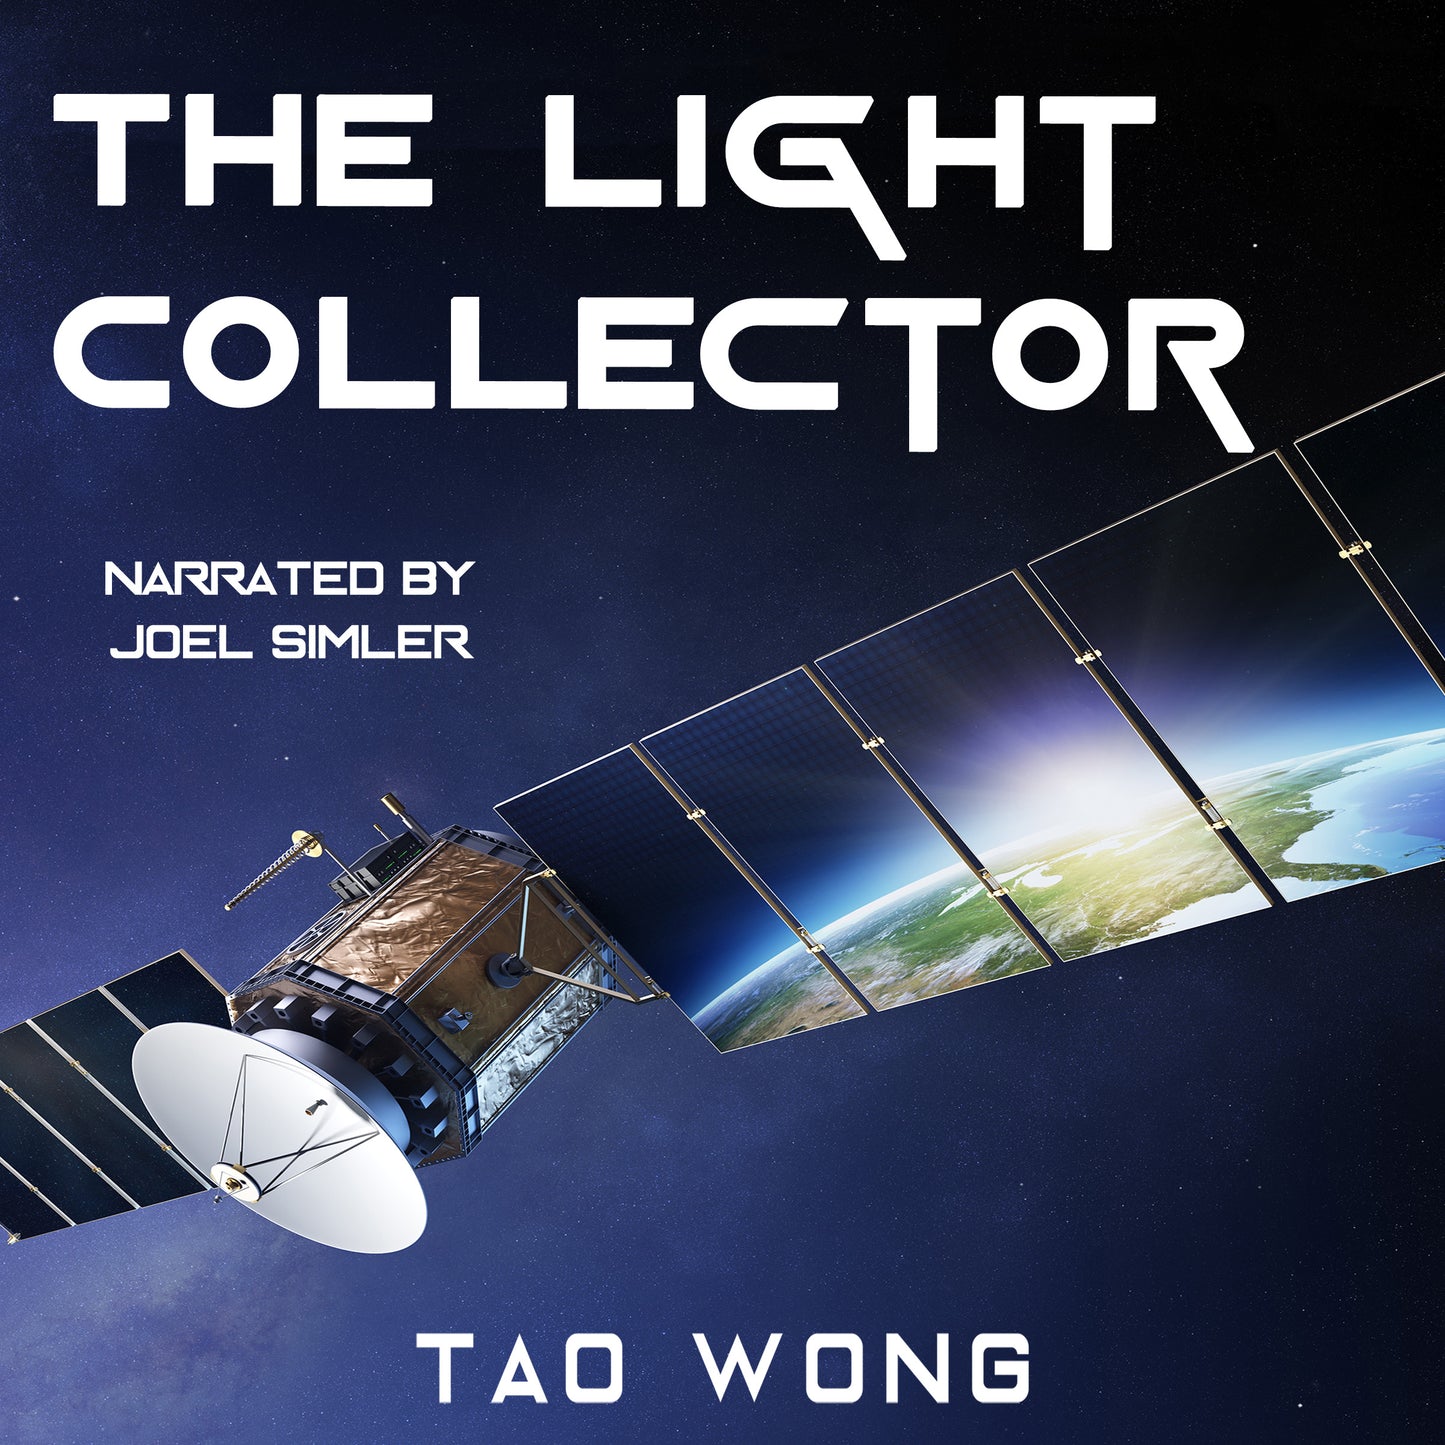 The Light Collector